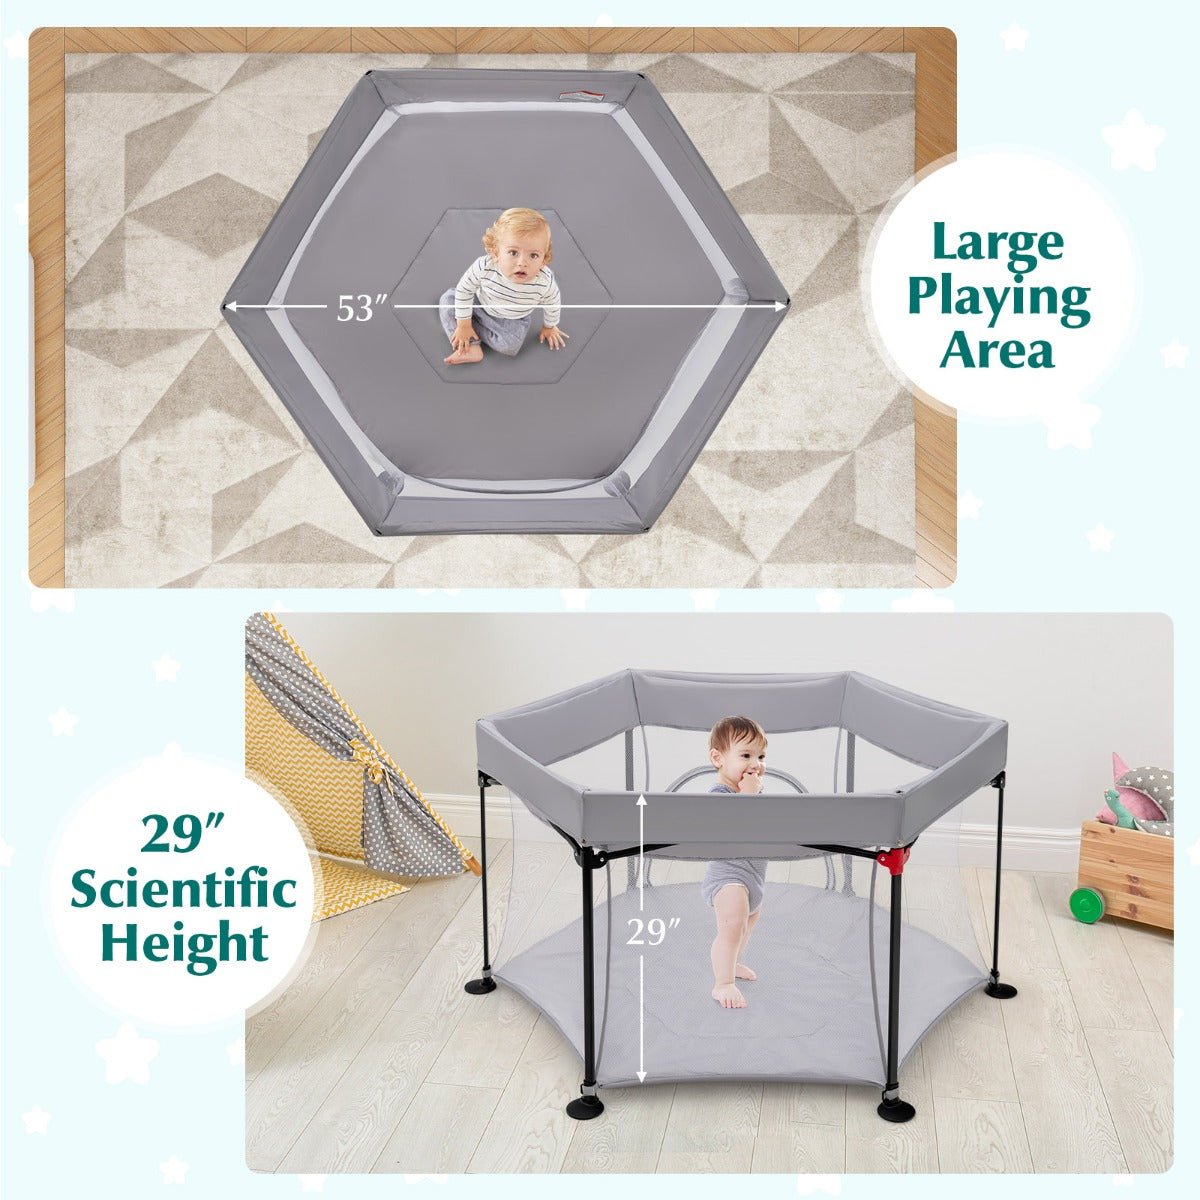 Portable Baby Playpen with Gray Removable Canopy: Ideal for Indoor & Outdoor